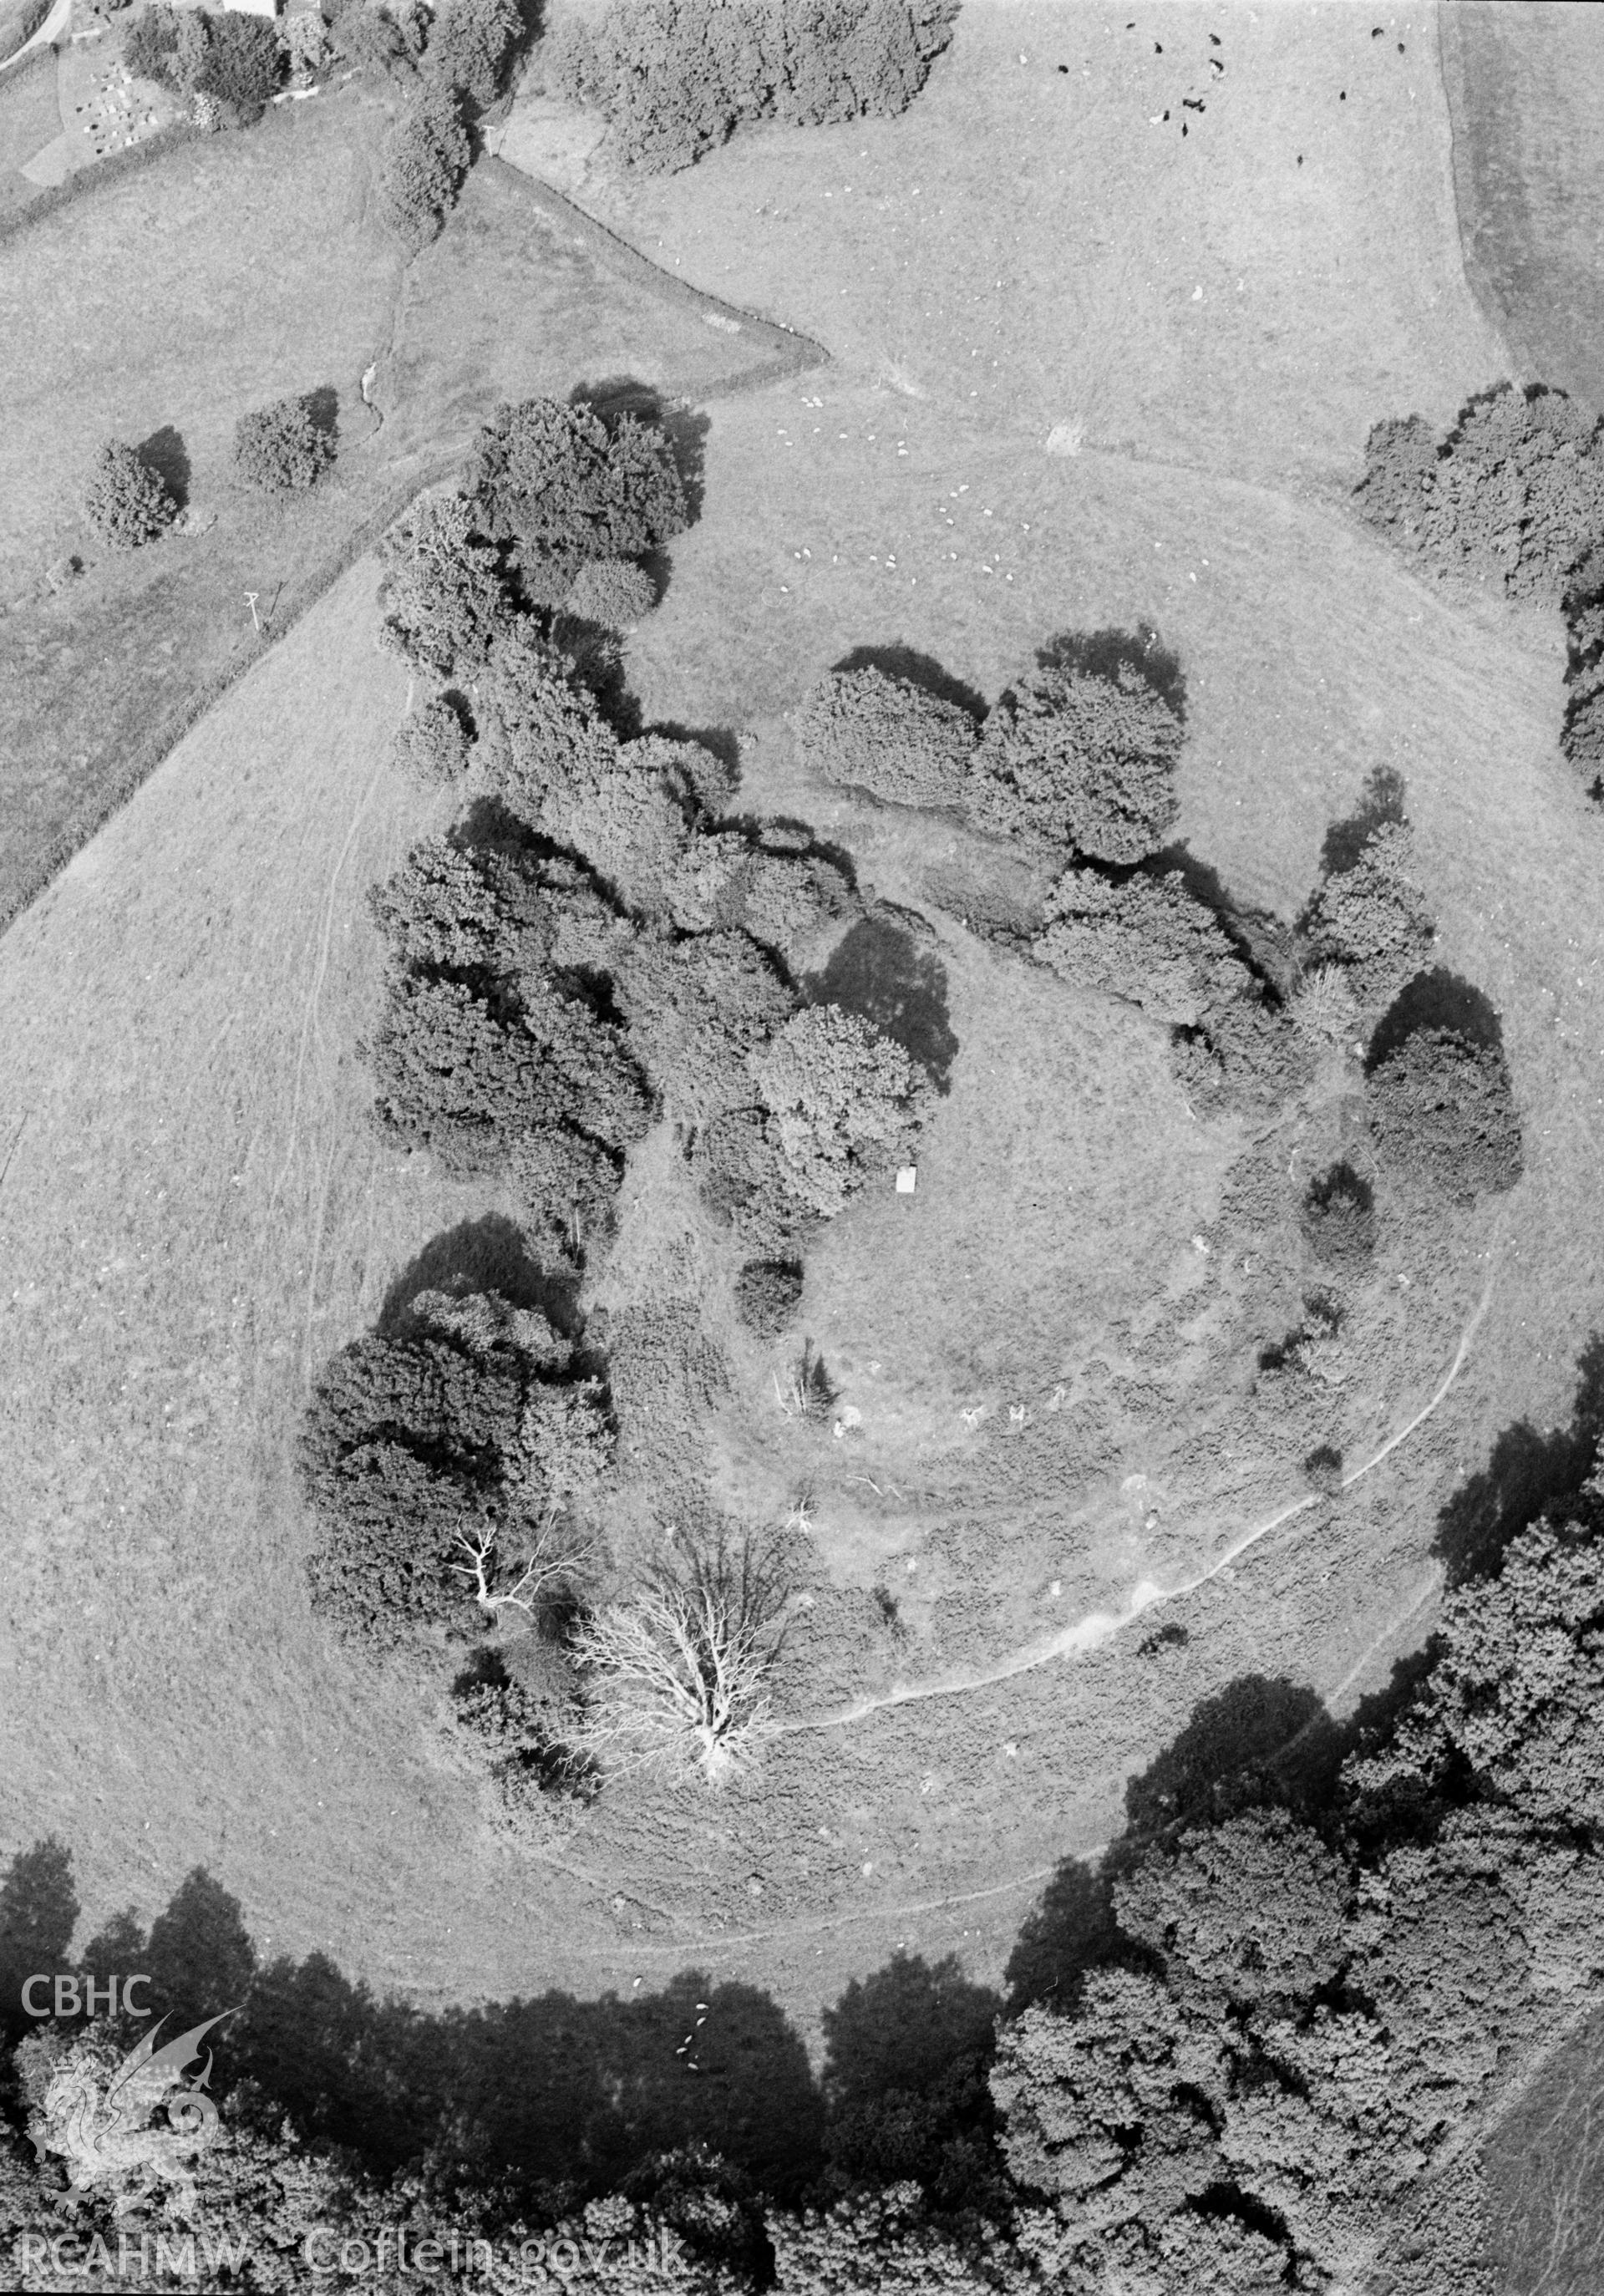 RCAHMW Black and white oblique aerial photograph of Crickadarn Defended Enclosure, Erwood, taken on 19/06/1998 by Toby Driver